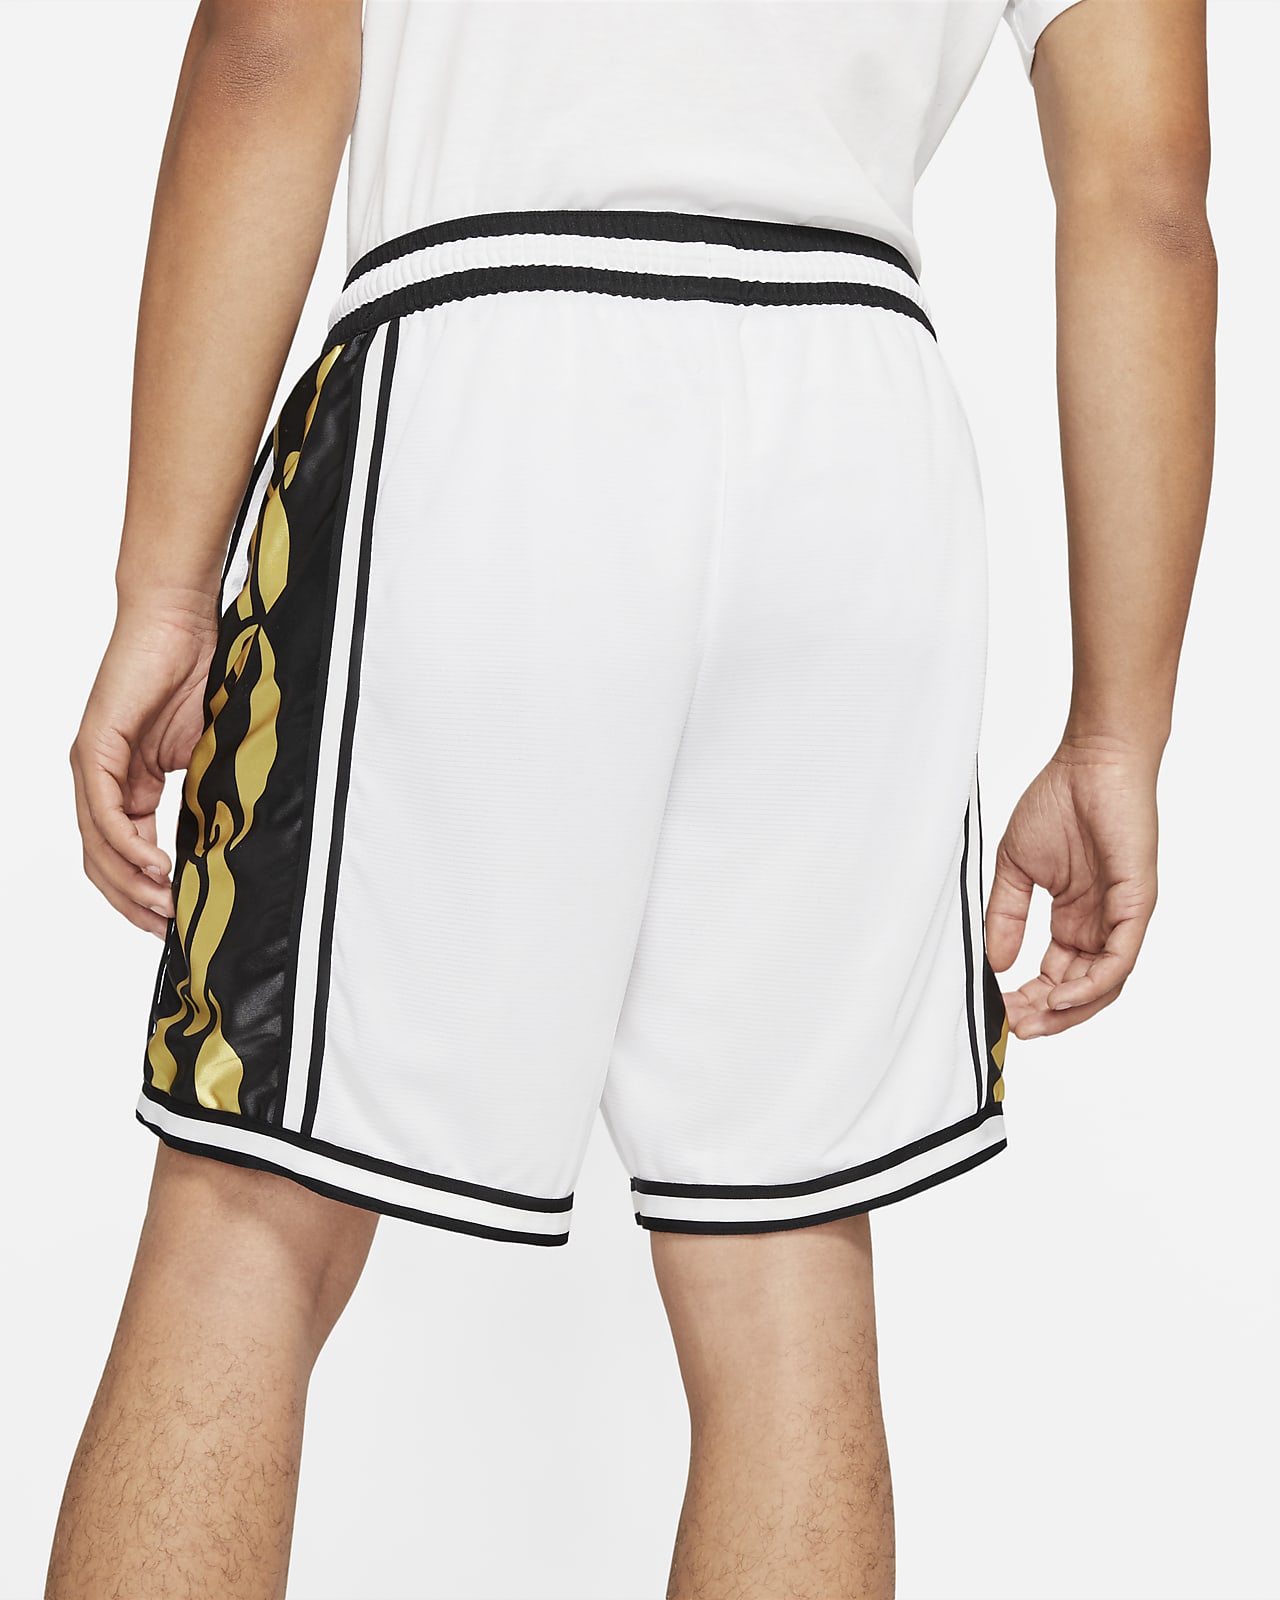 white and gold nike shorts